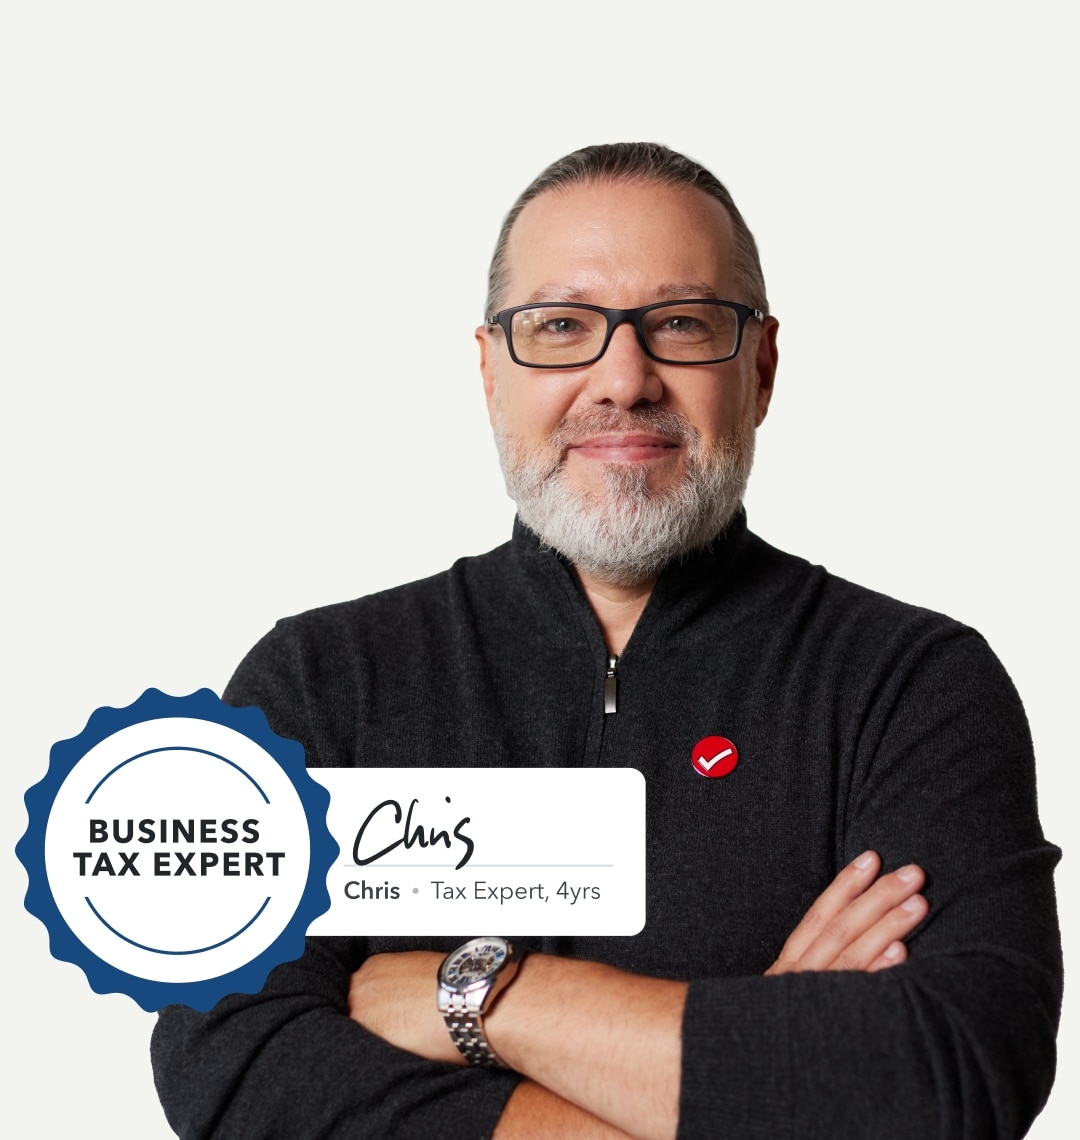 Chris, a TurboTax tax expert for 4 years